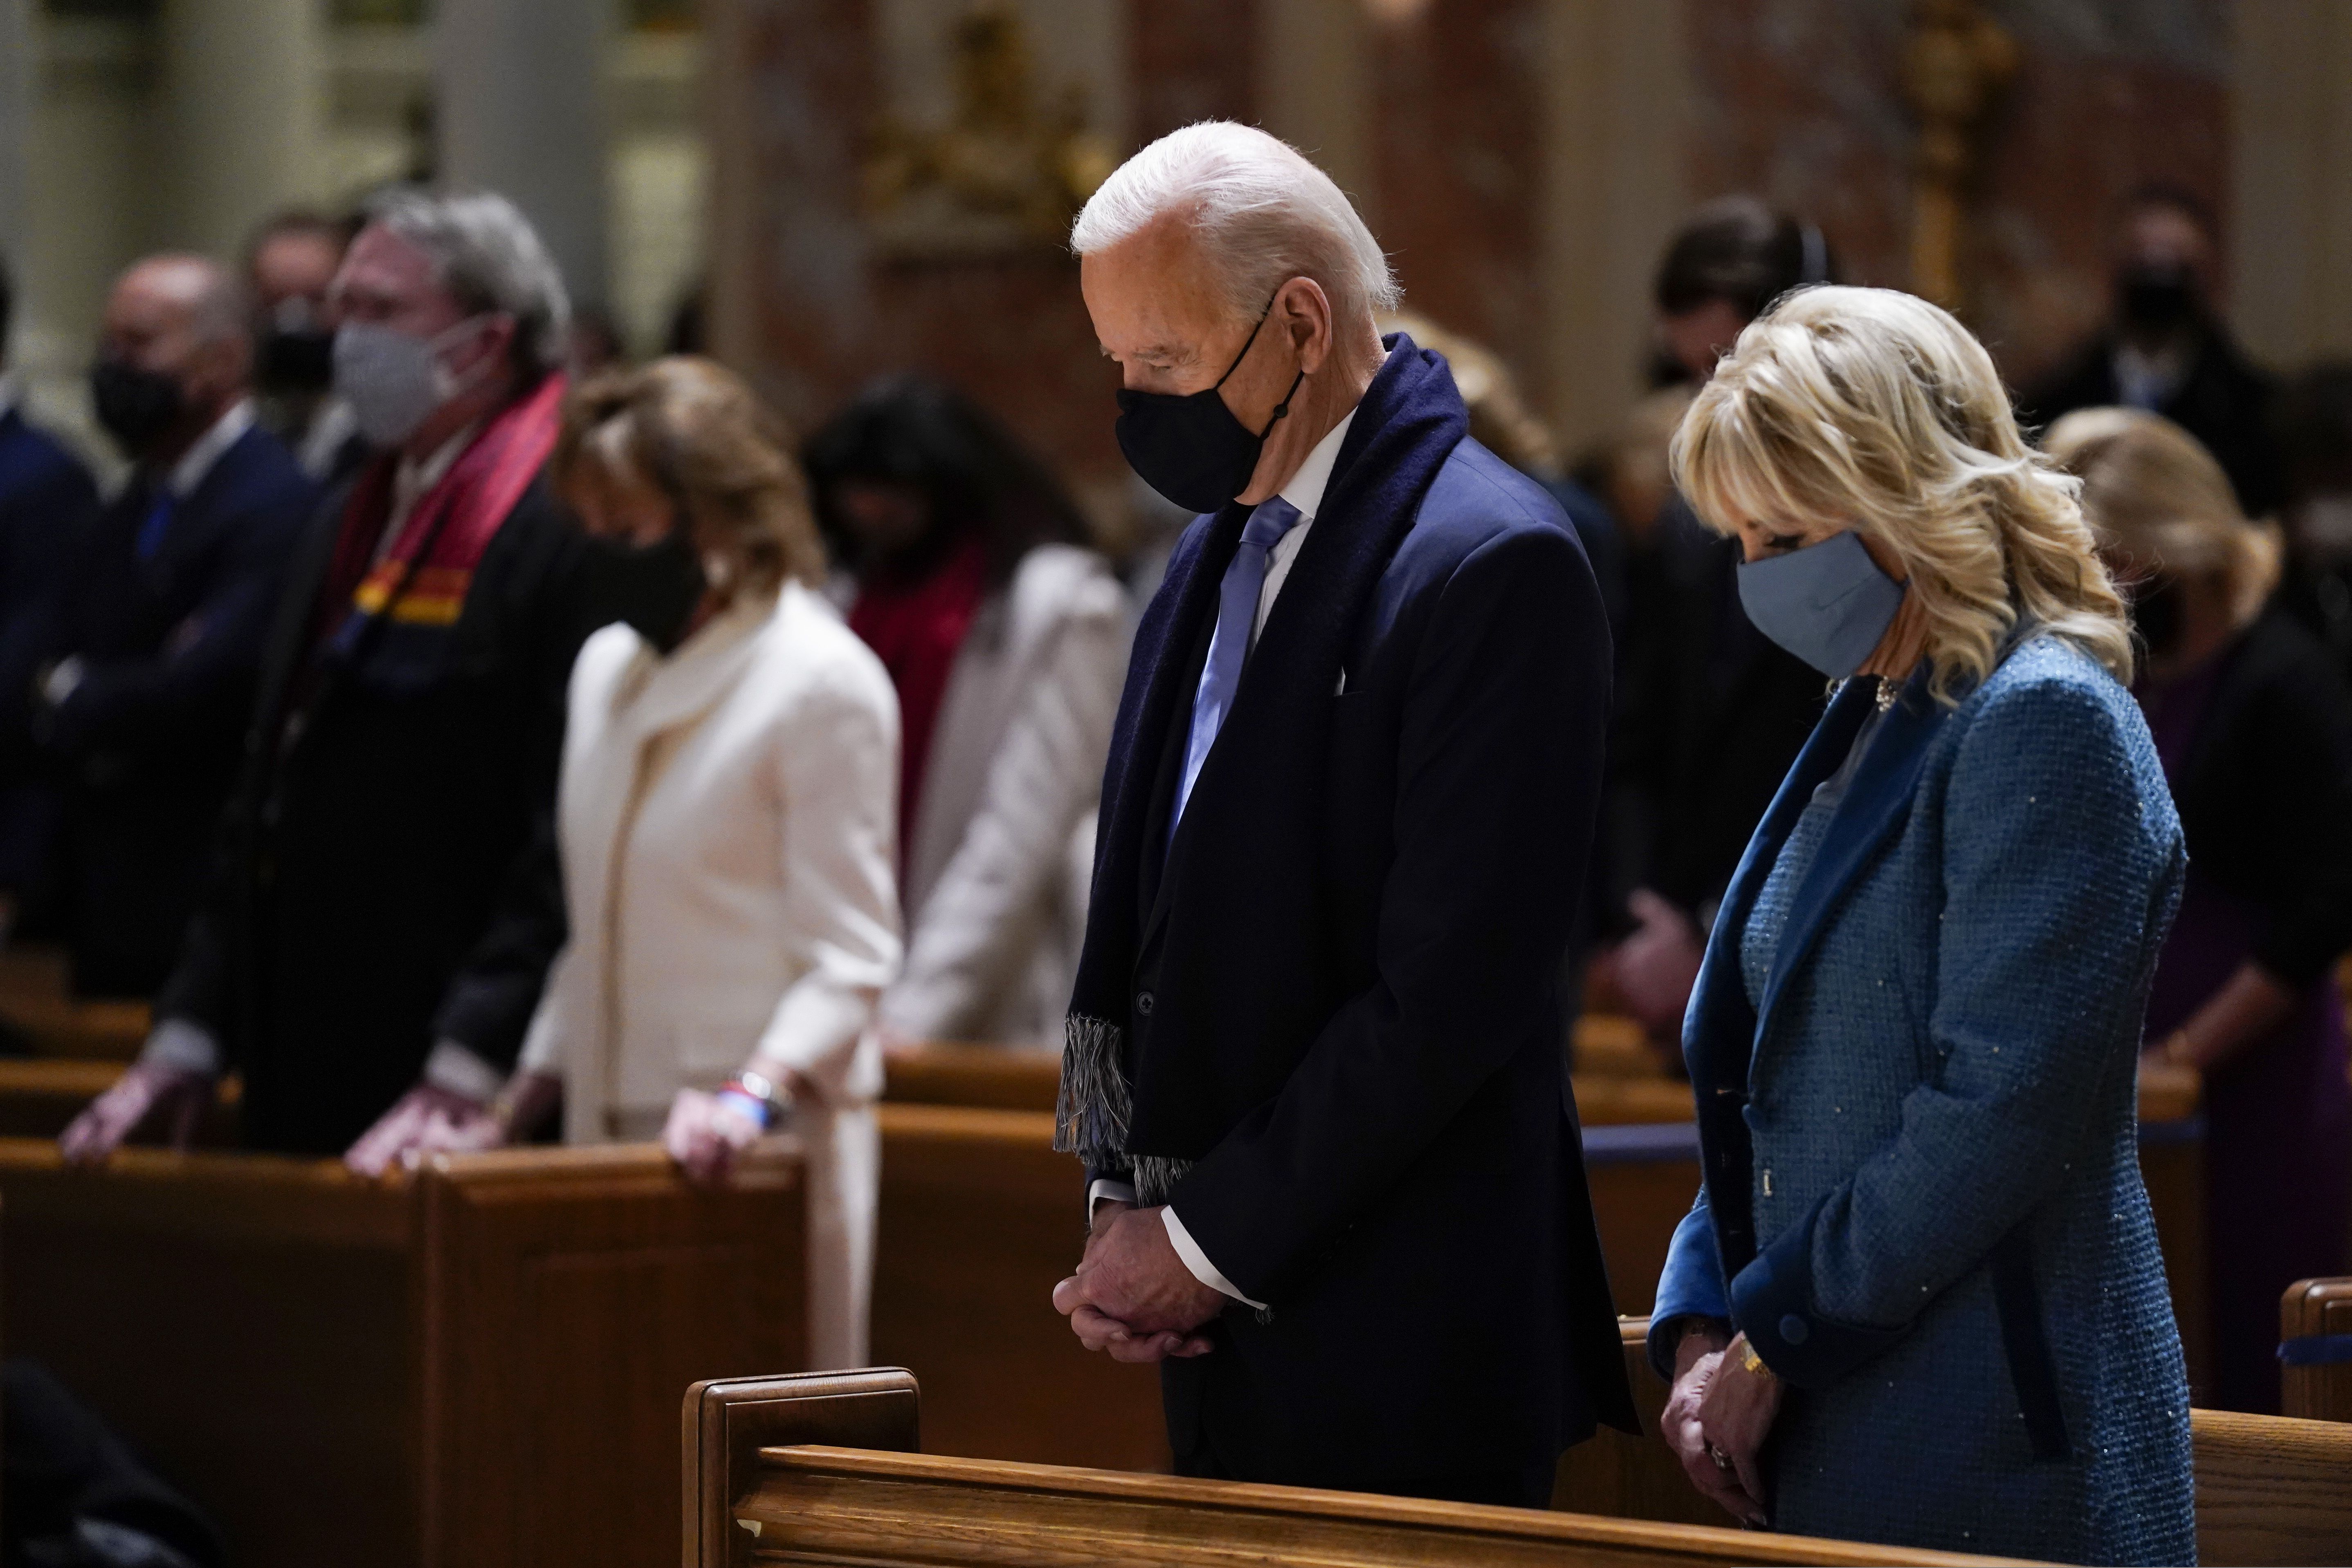 Emma Petty Addams, leader of group Mormon Women for Ethical Government, will be among 31 faith leaders taking part in Joe Biden's inaugural prayer service the Cathedral in